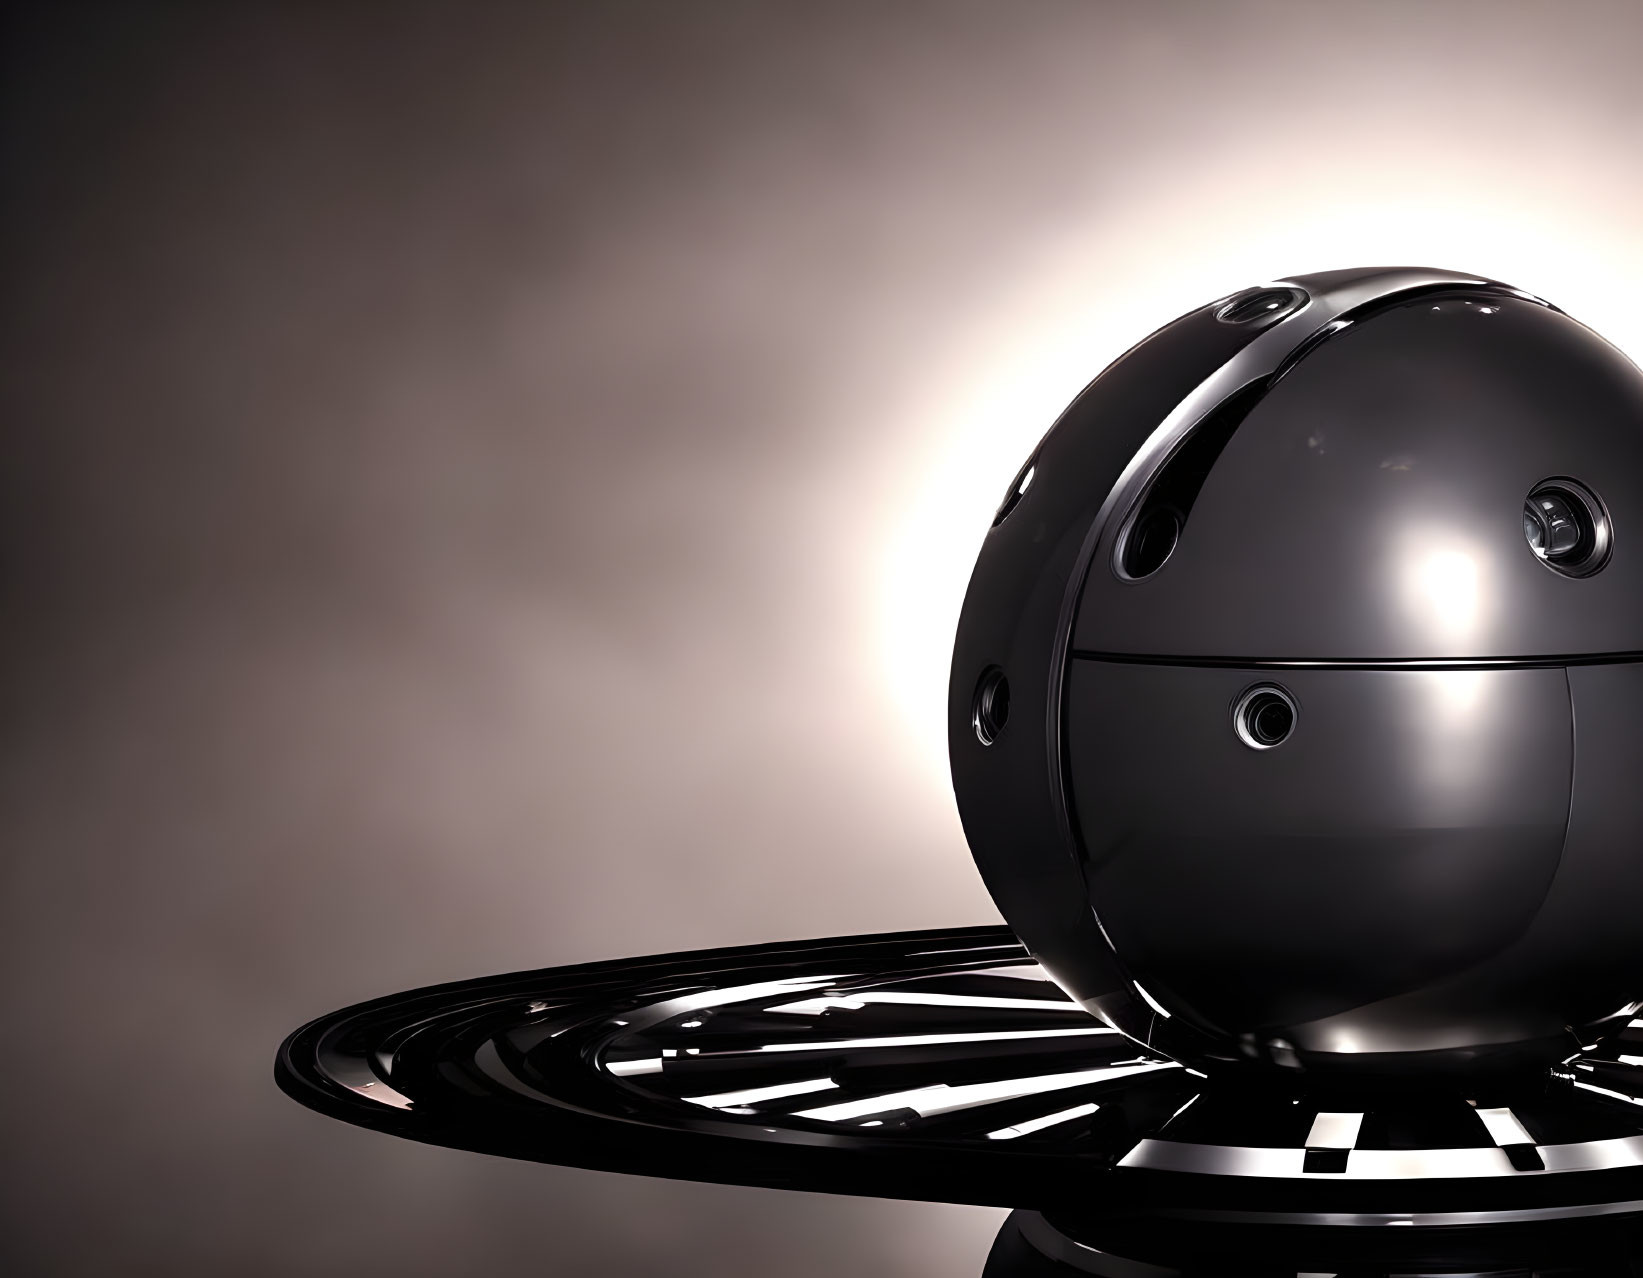 Futuristic spherical robot on patterned base with soft light